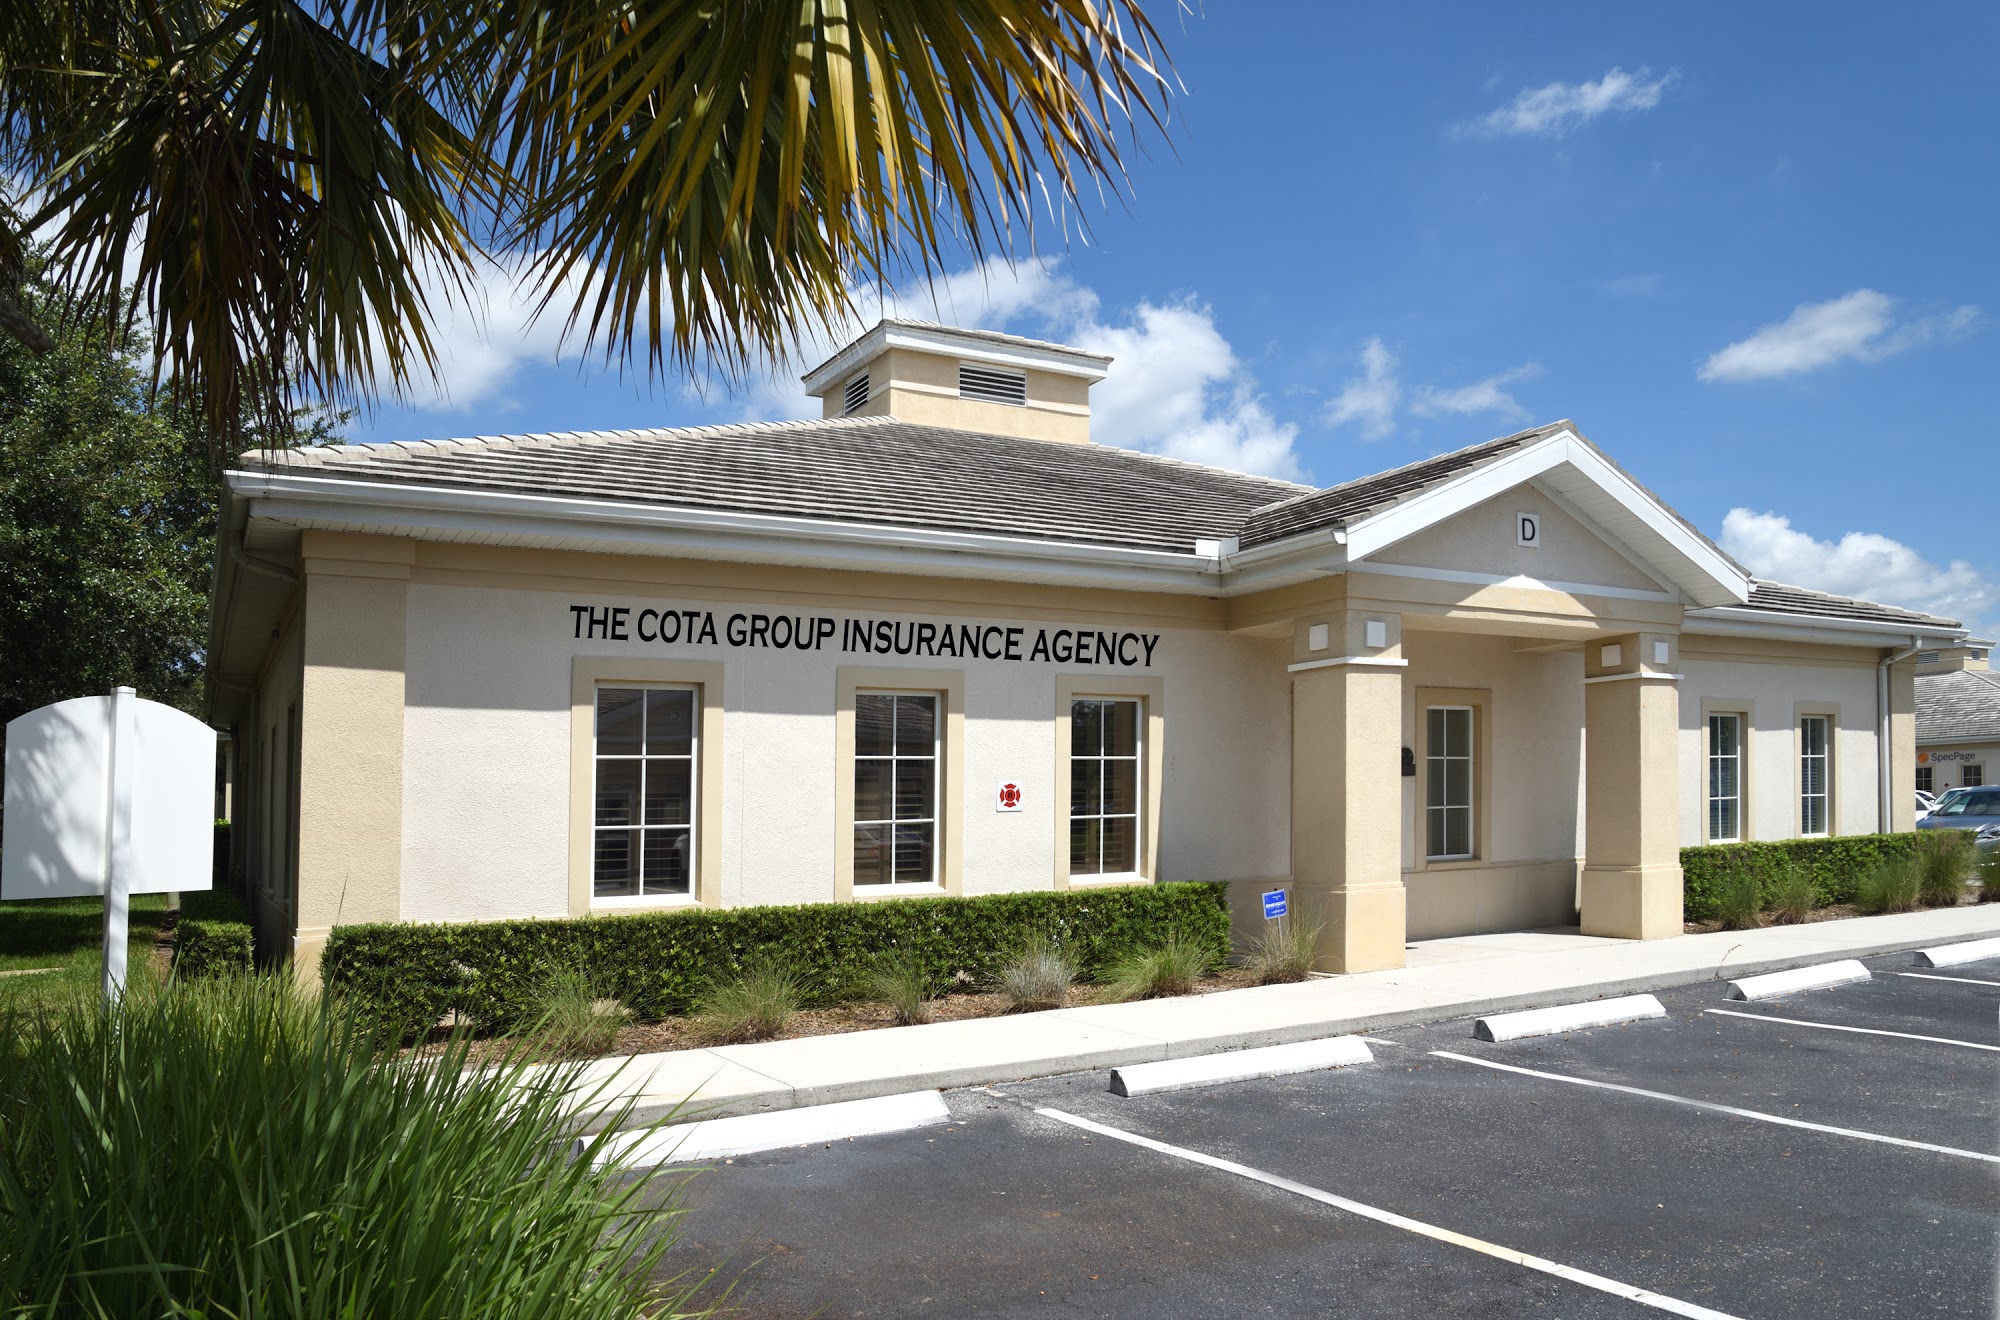 The Cota Group Insurance Agency